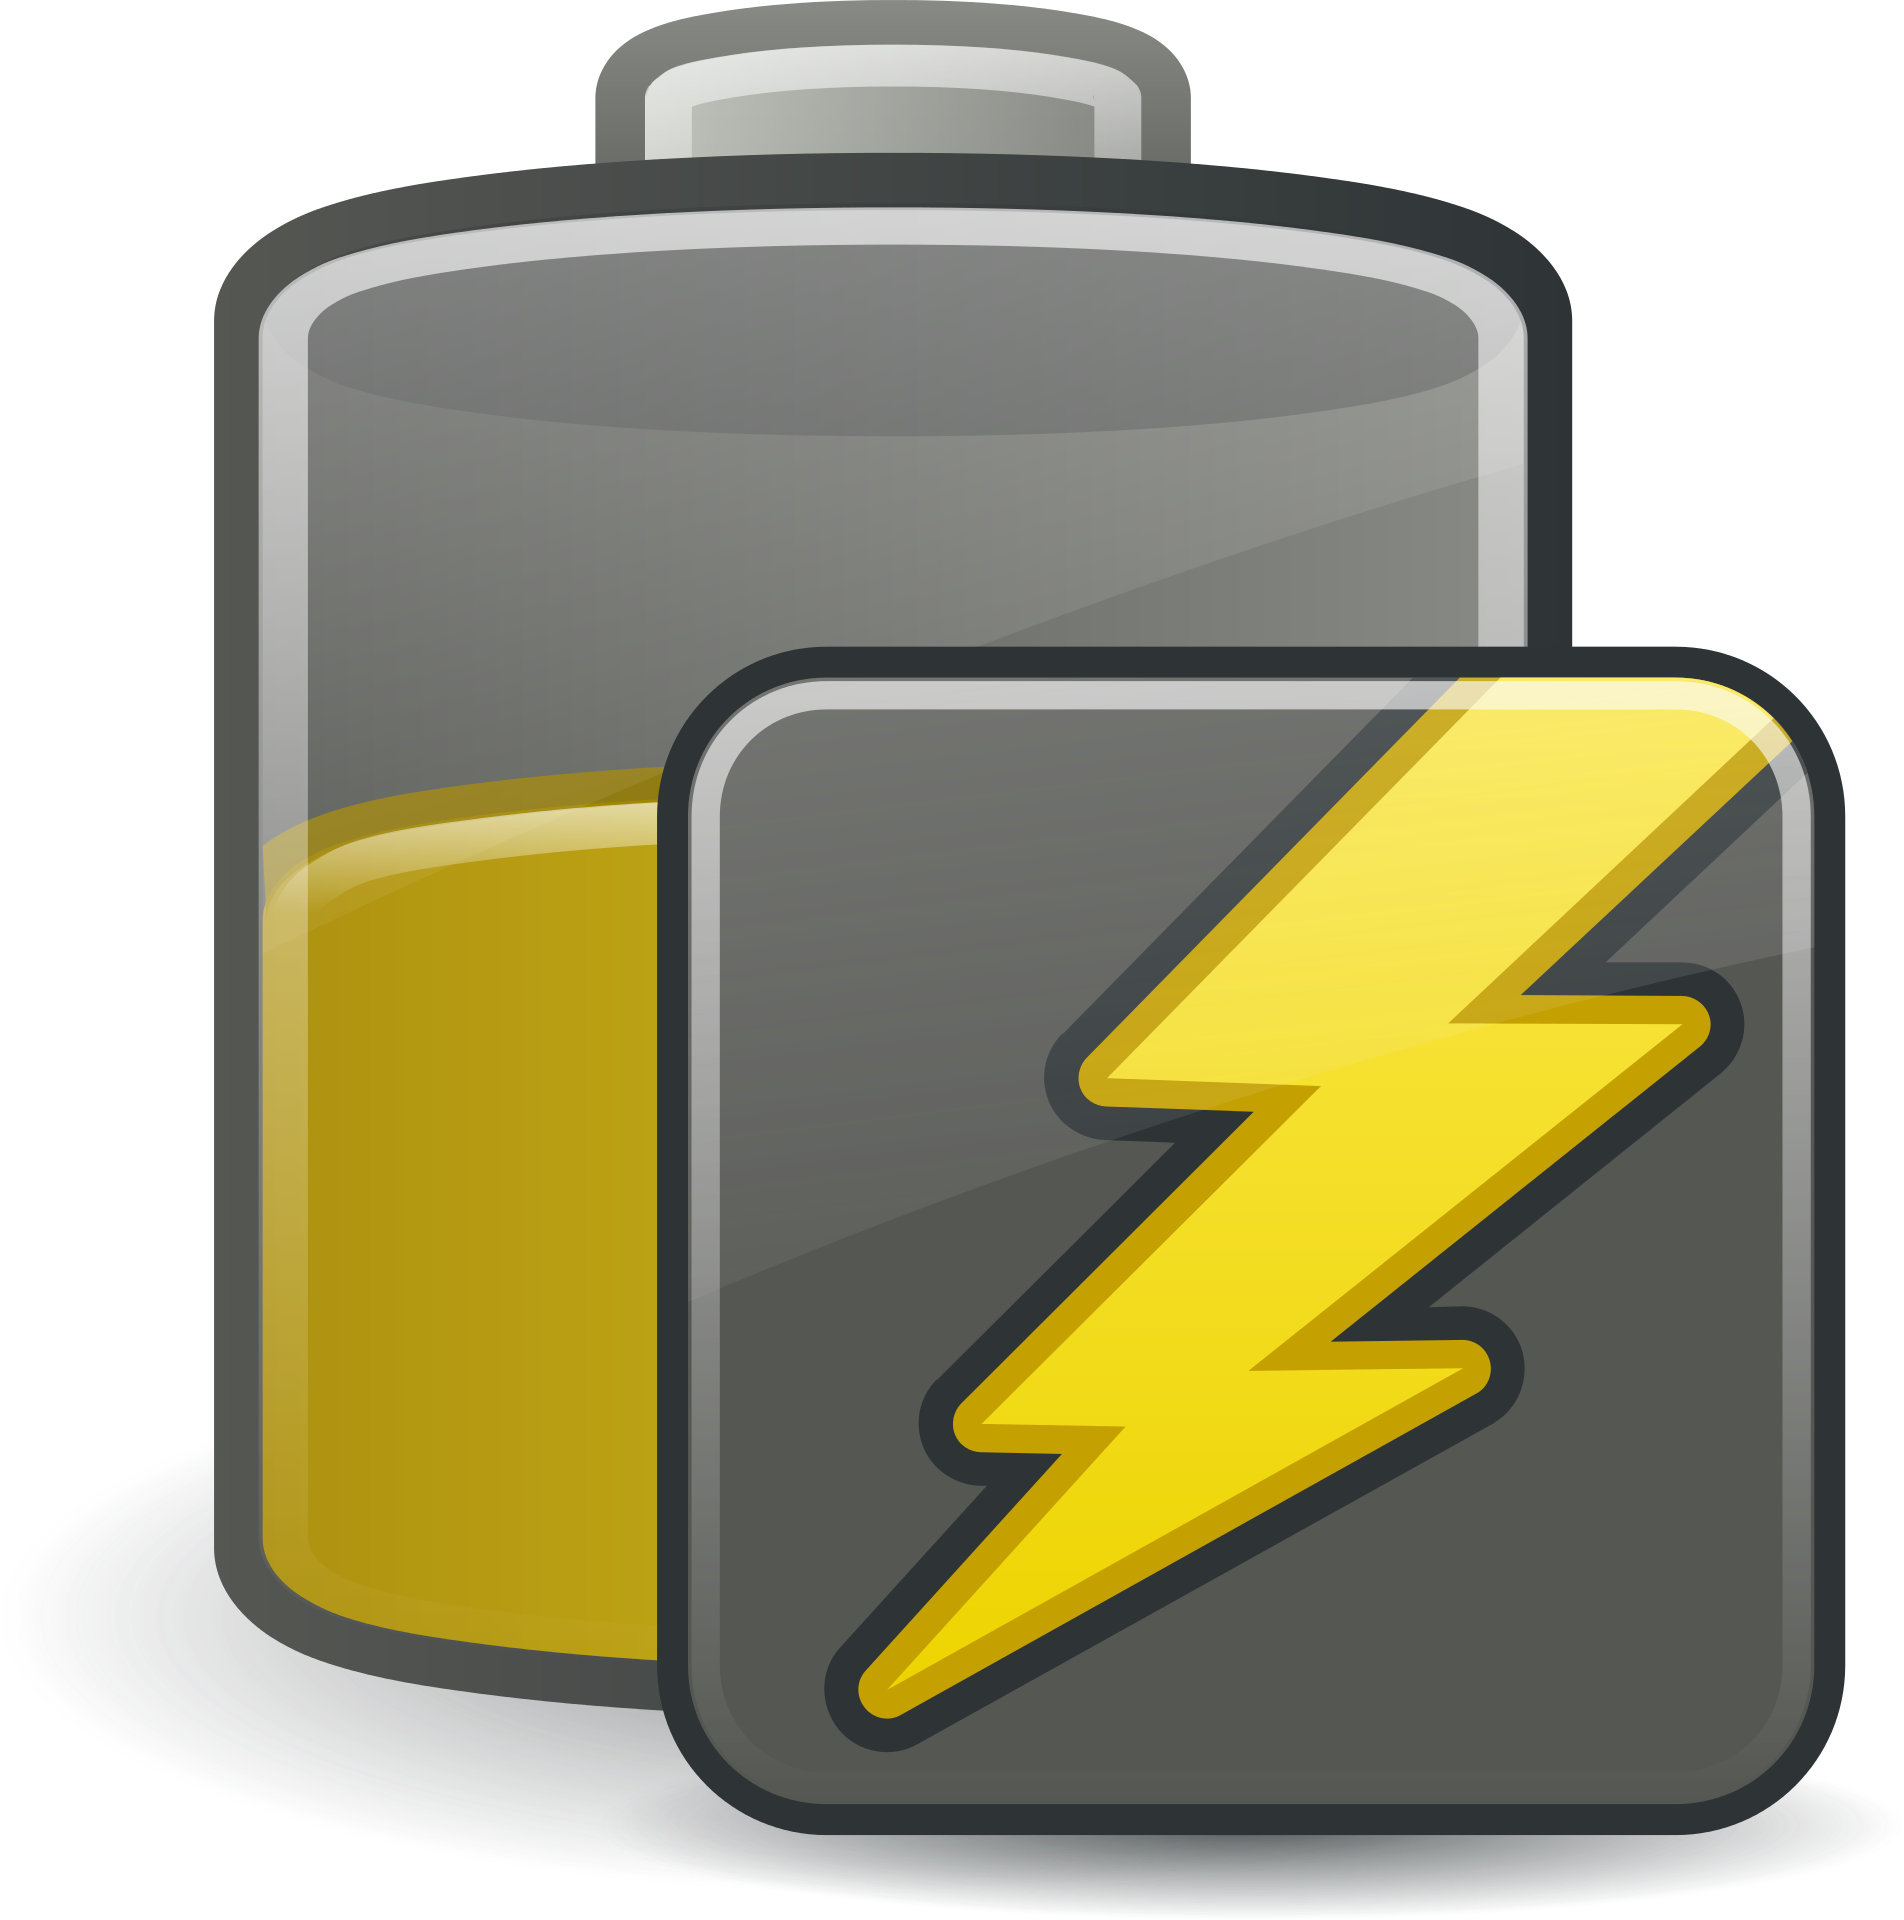 Battery Icon PNG Image - PurePNG | Free transparent CC0 ...